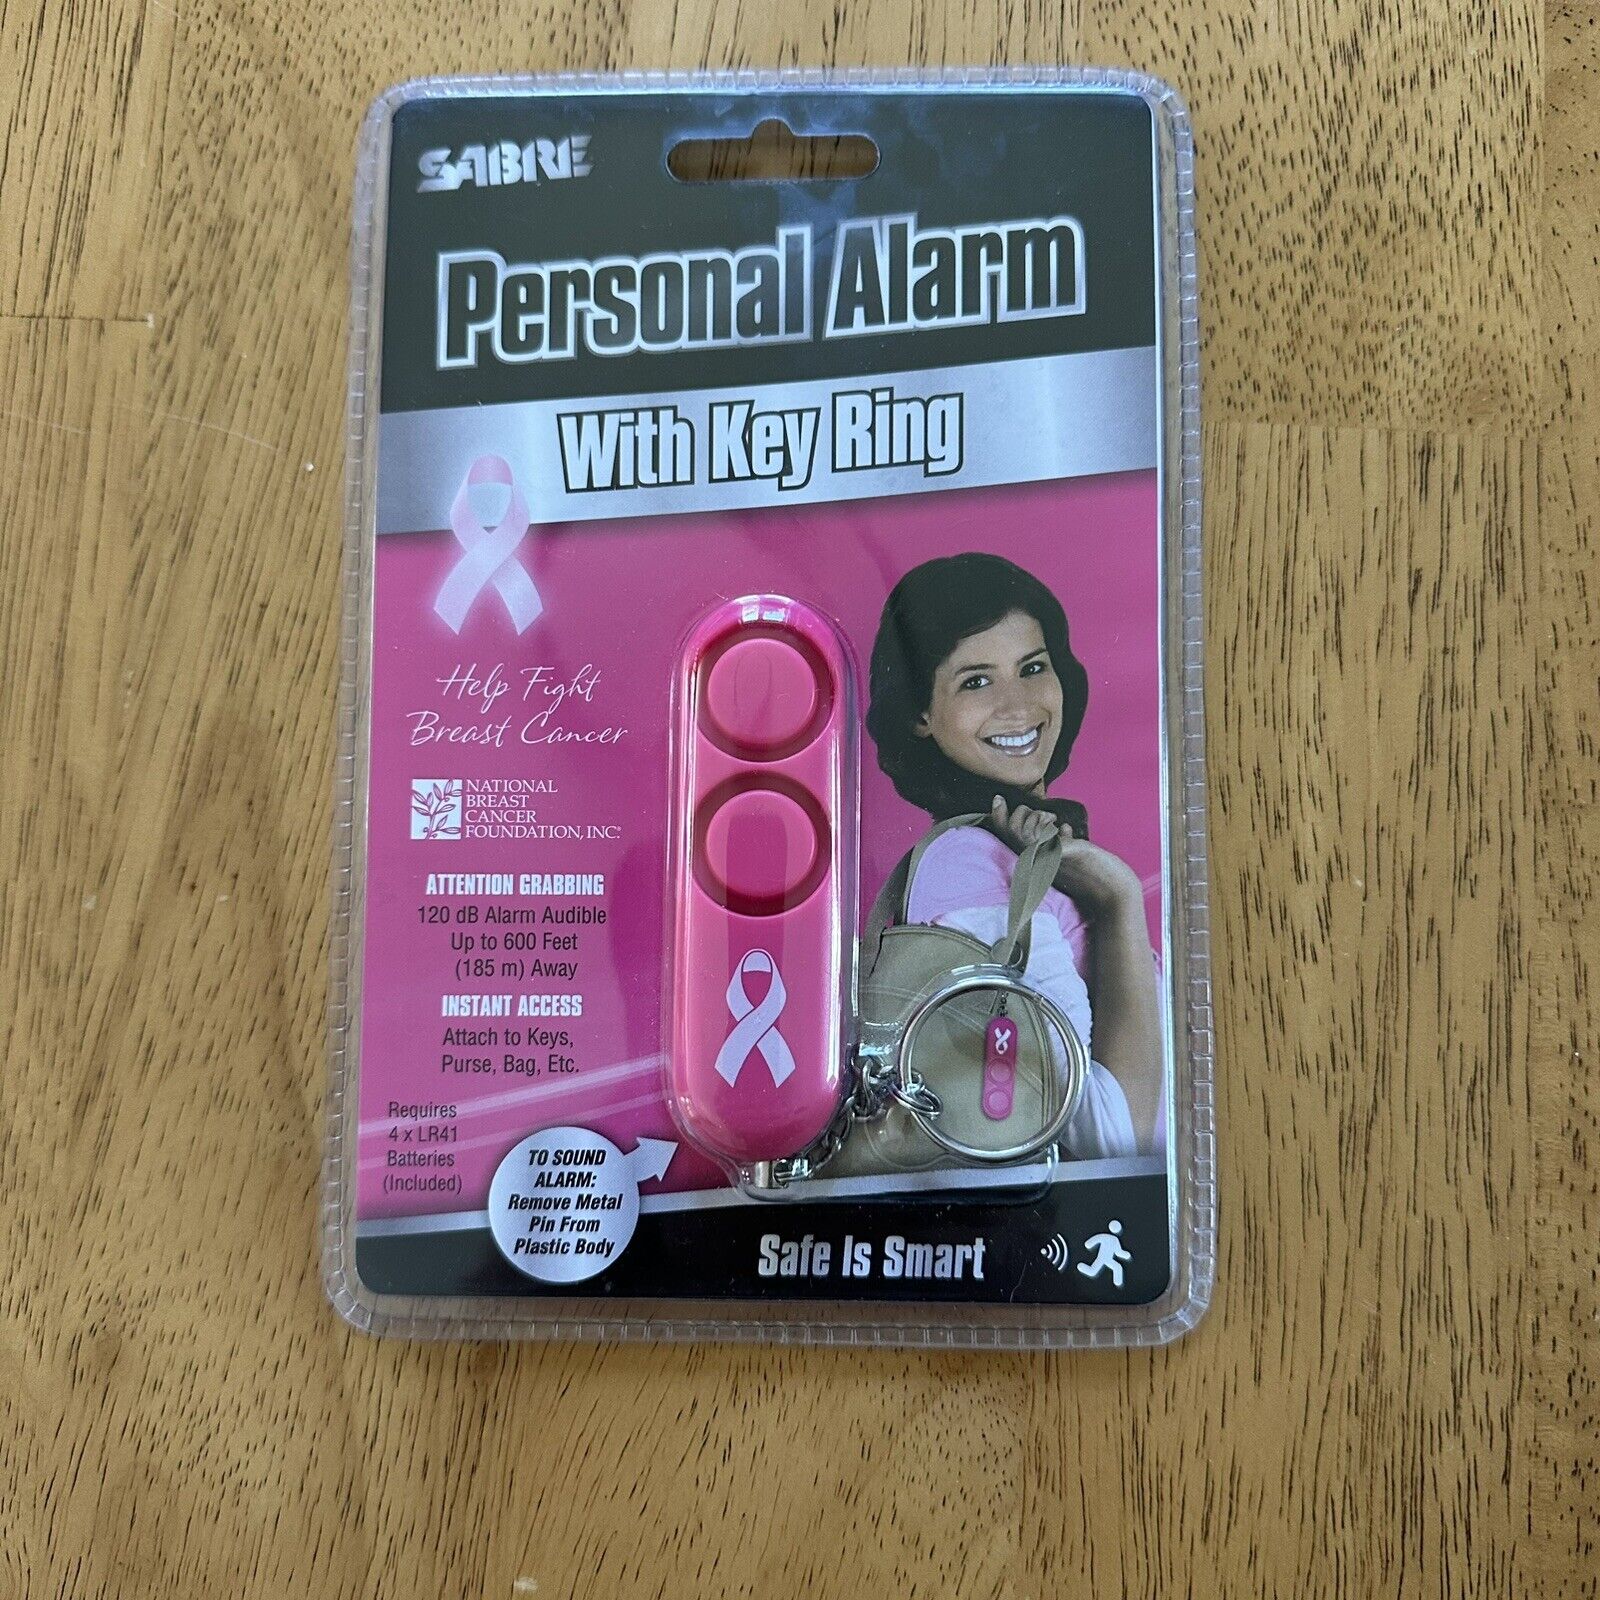 Sabre Personal Alarm Portable Safety and Security 110dB Pa-nbcf-o1 Pink